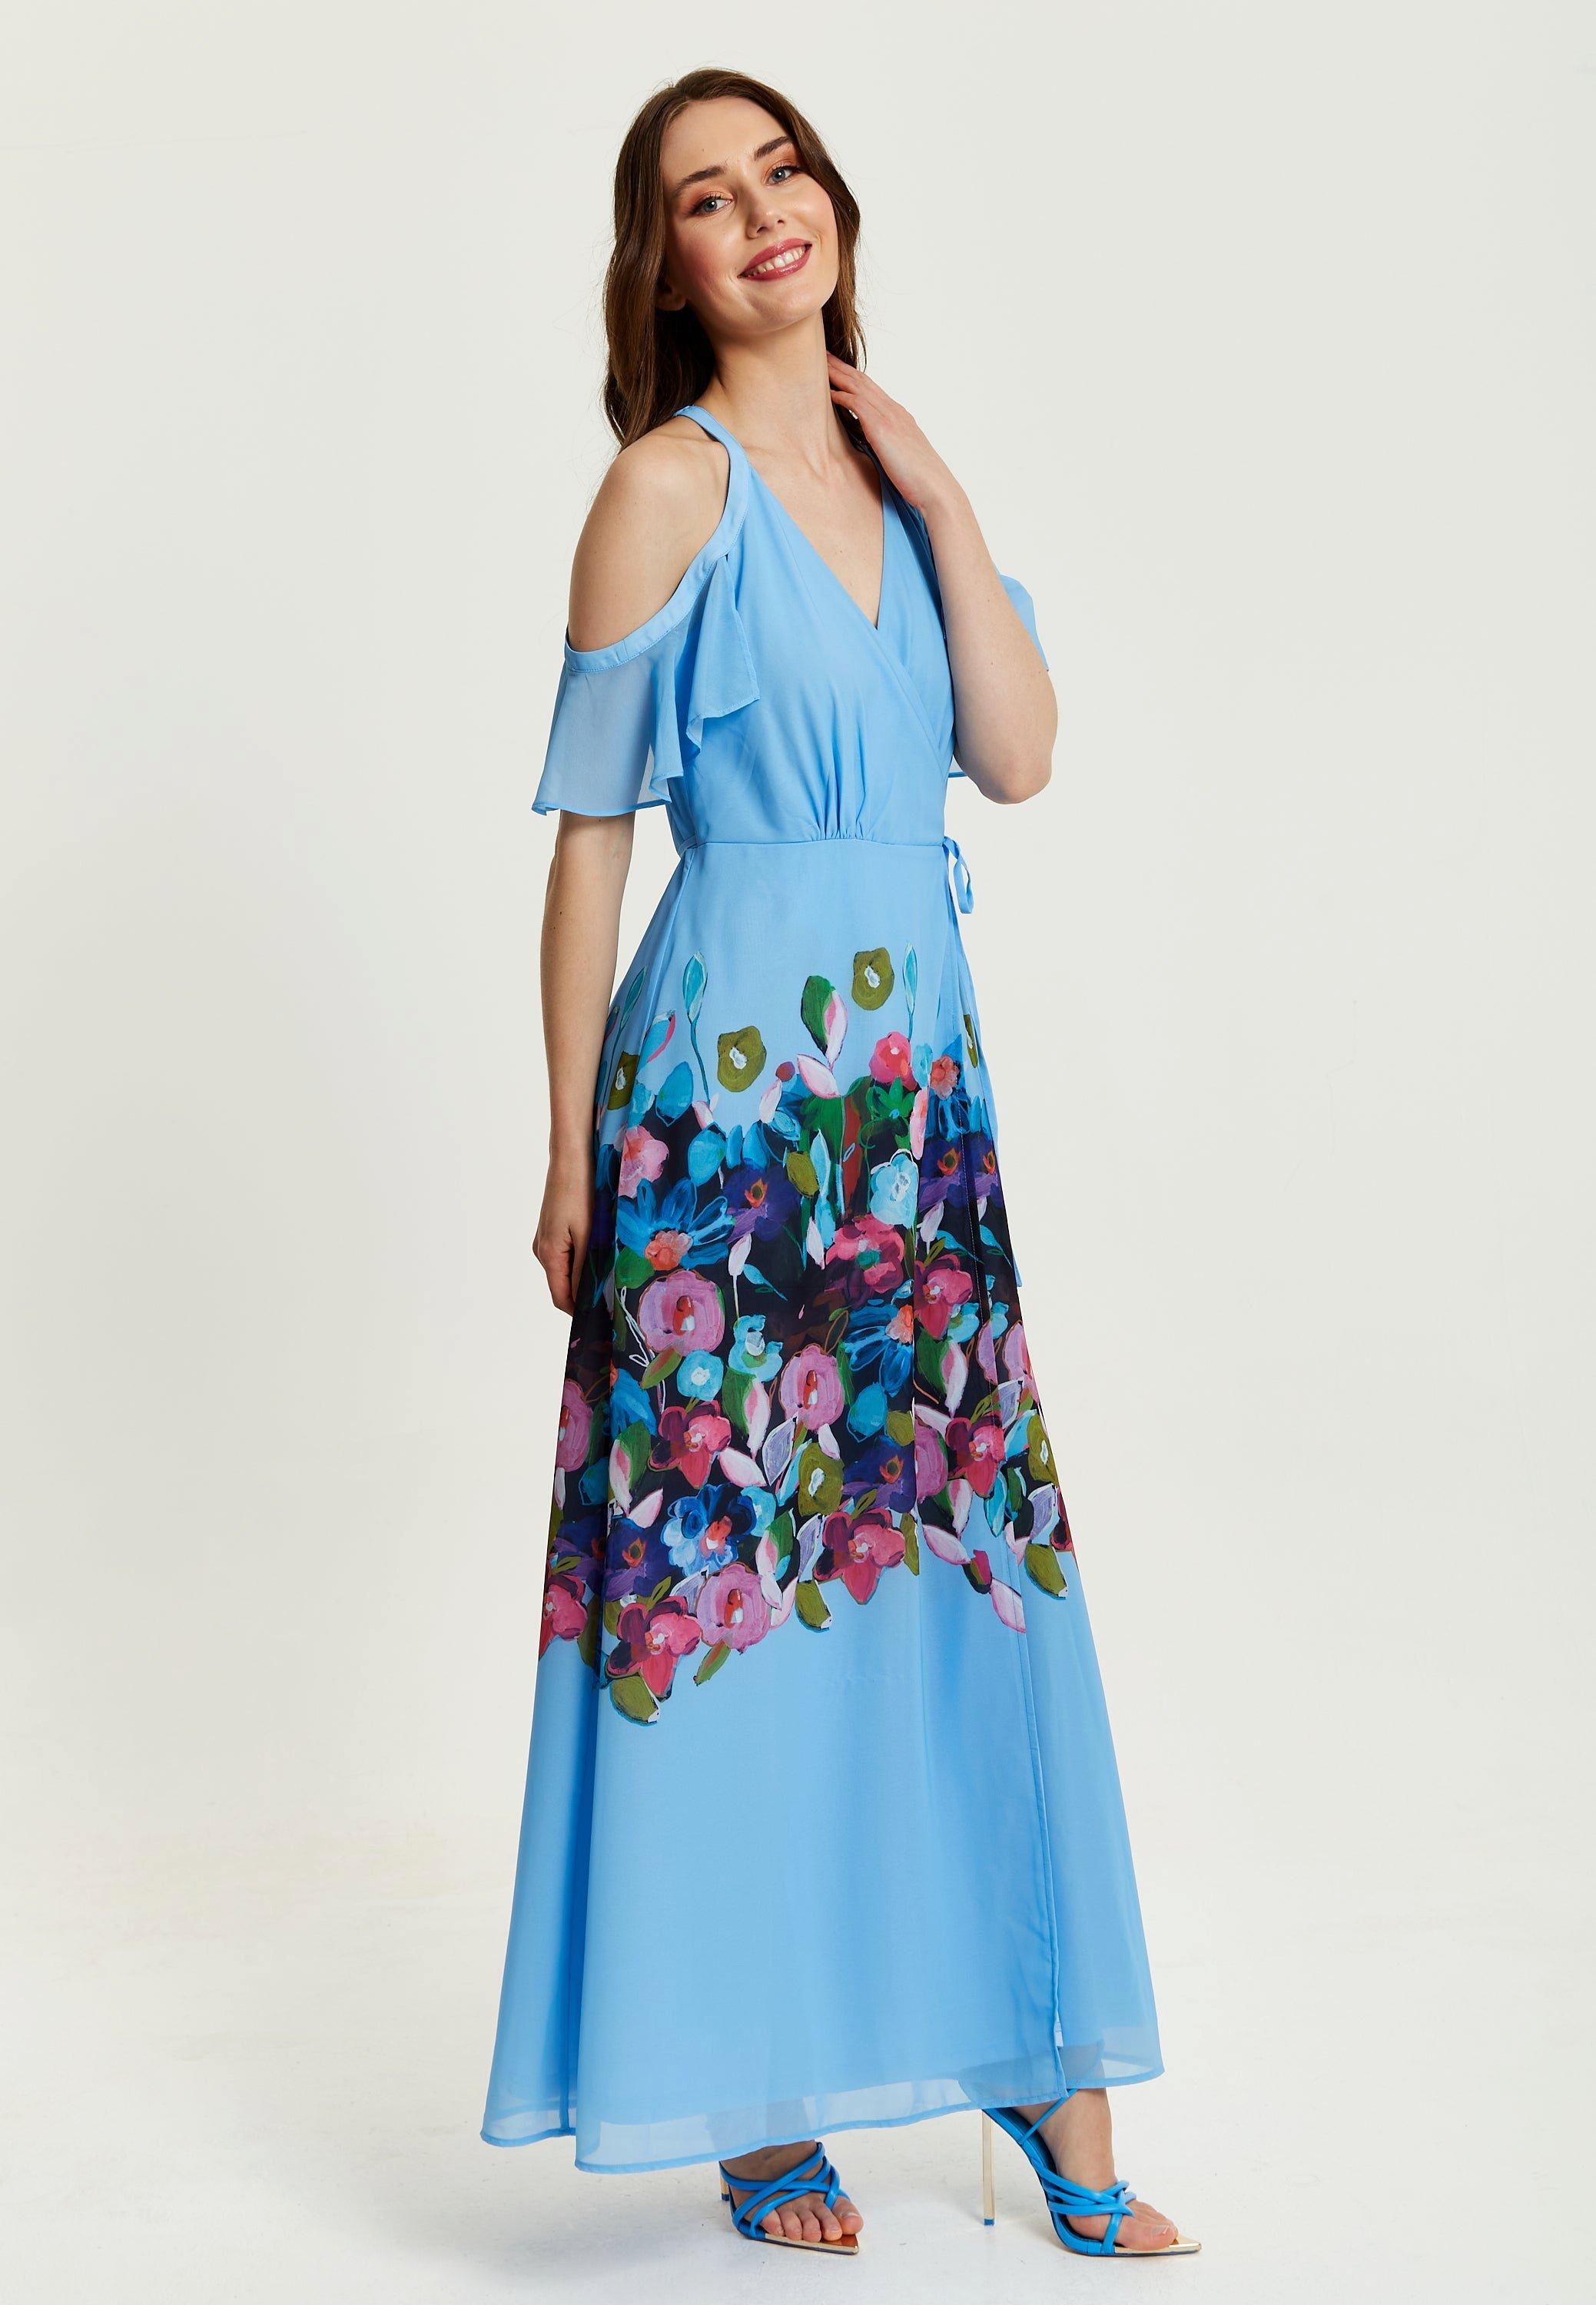 Floral Print Maxi Wrap Dress With Frill Details in Blue